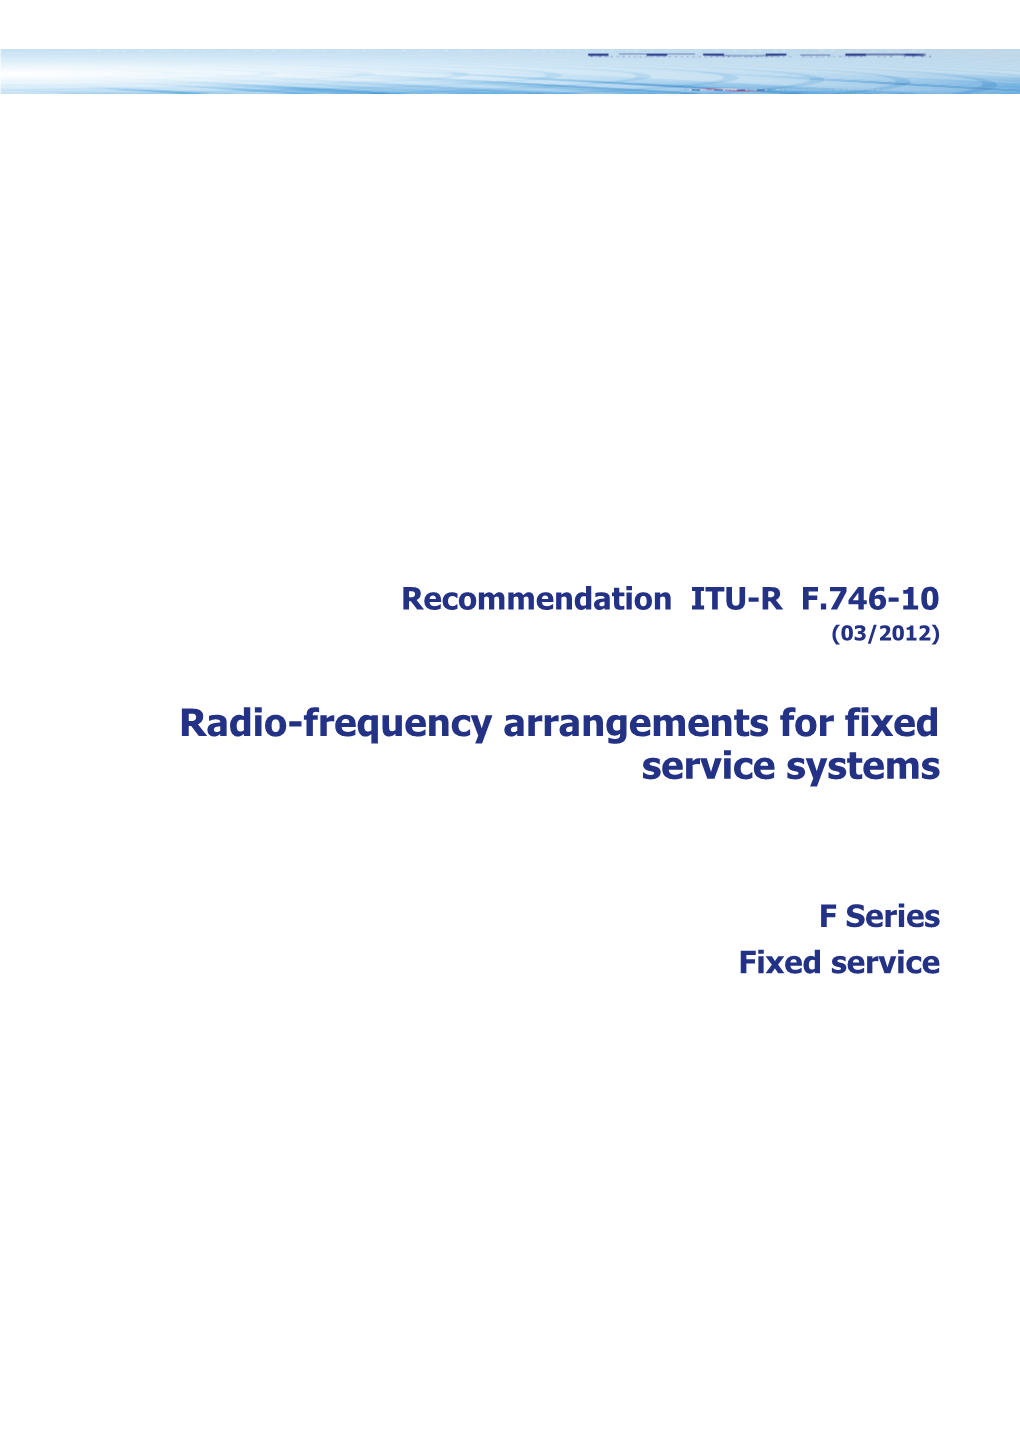 RECOMMENDATION ITU-R F.746-10 - Radio-Frequency Arrangements for Fixed Service Systems